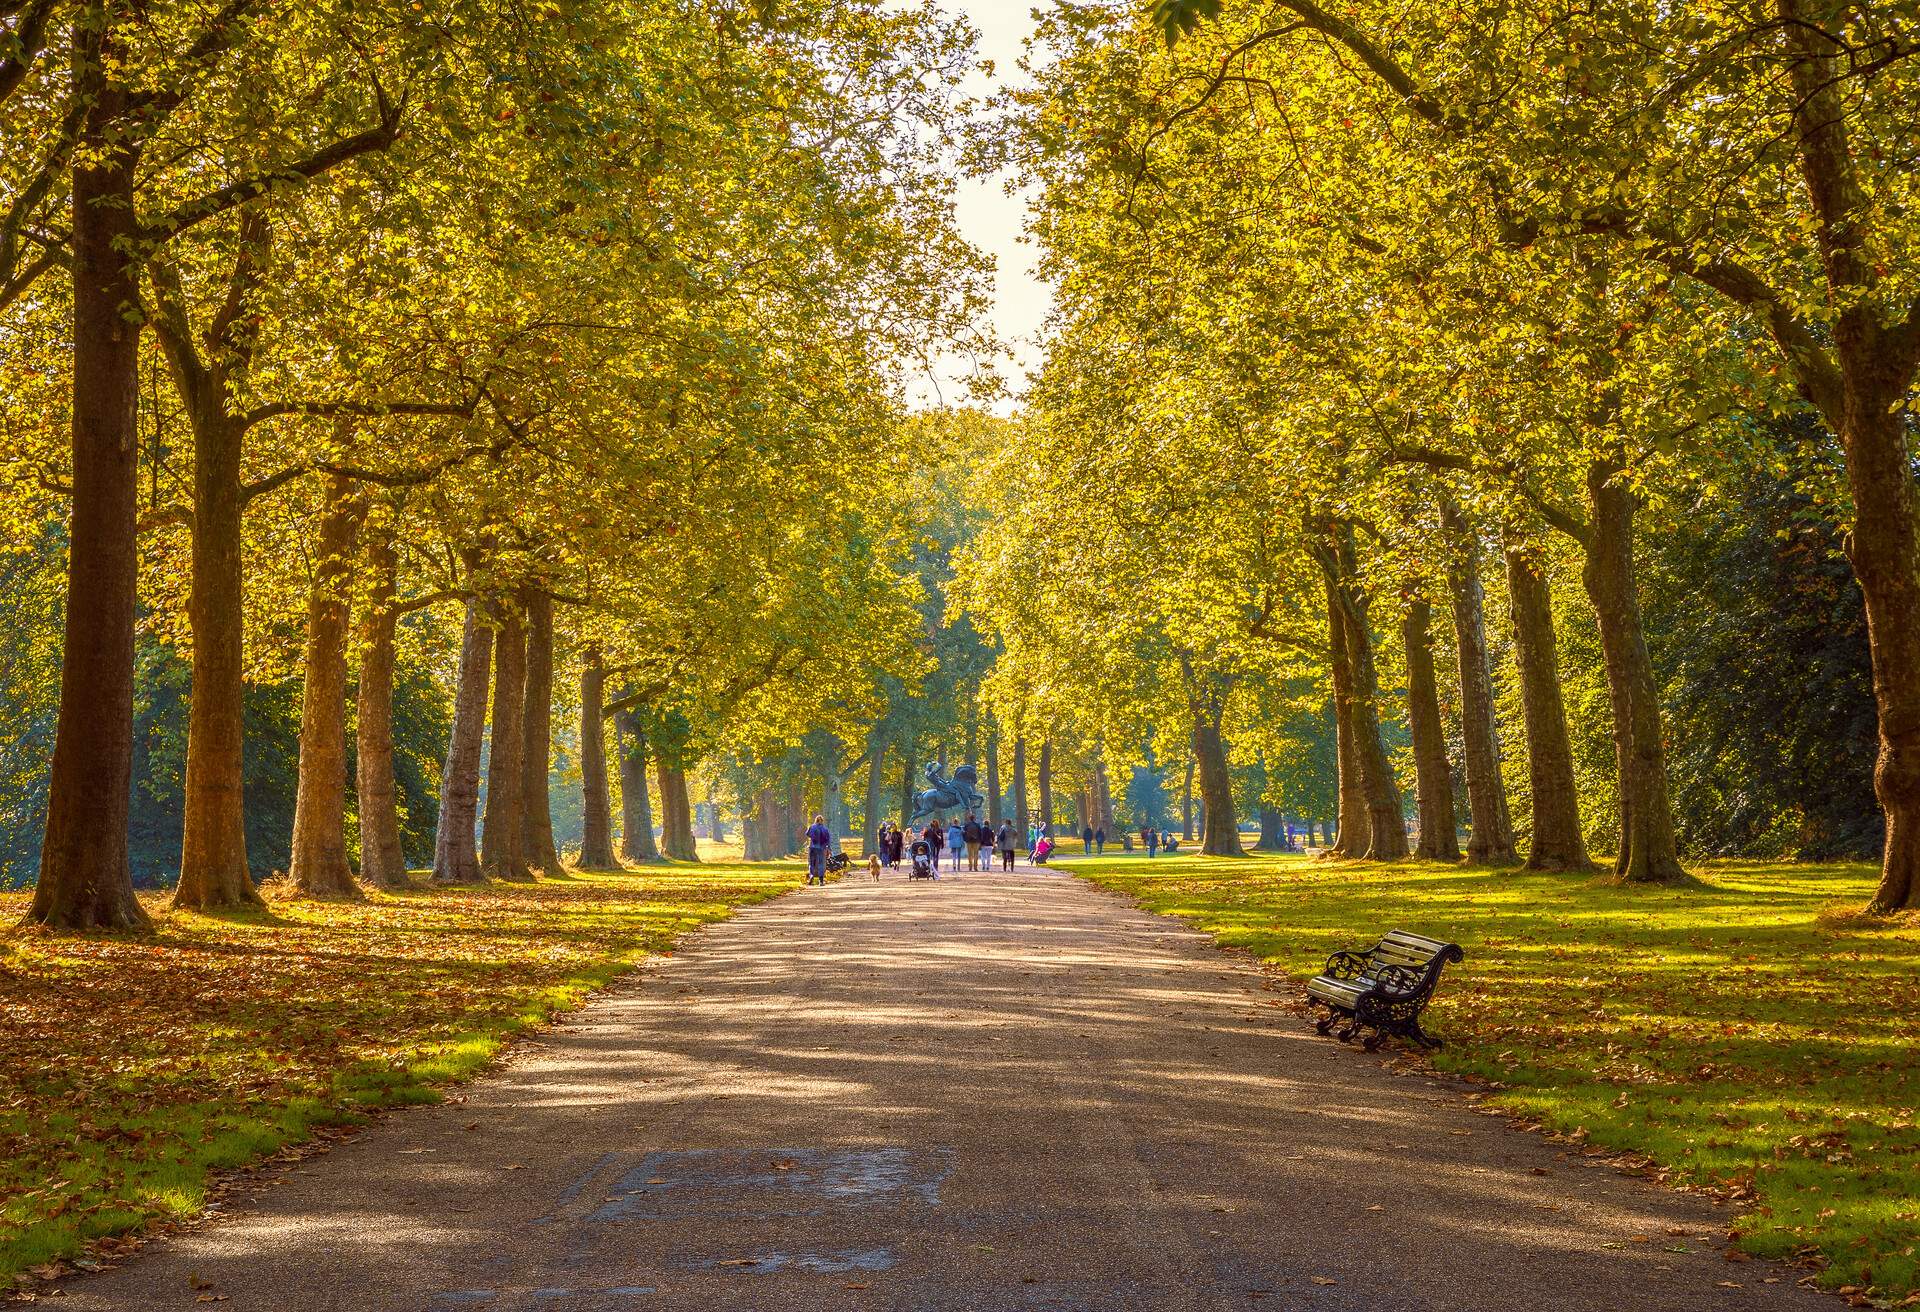 Tree lined street in Hyde Park London, autumn season; Shutterstock ID 497801653; Purchase Order: SF-06928905; Job: ; Client/Licensee: ; Other: